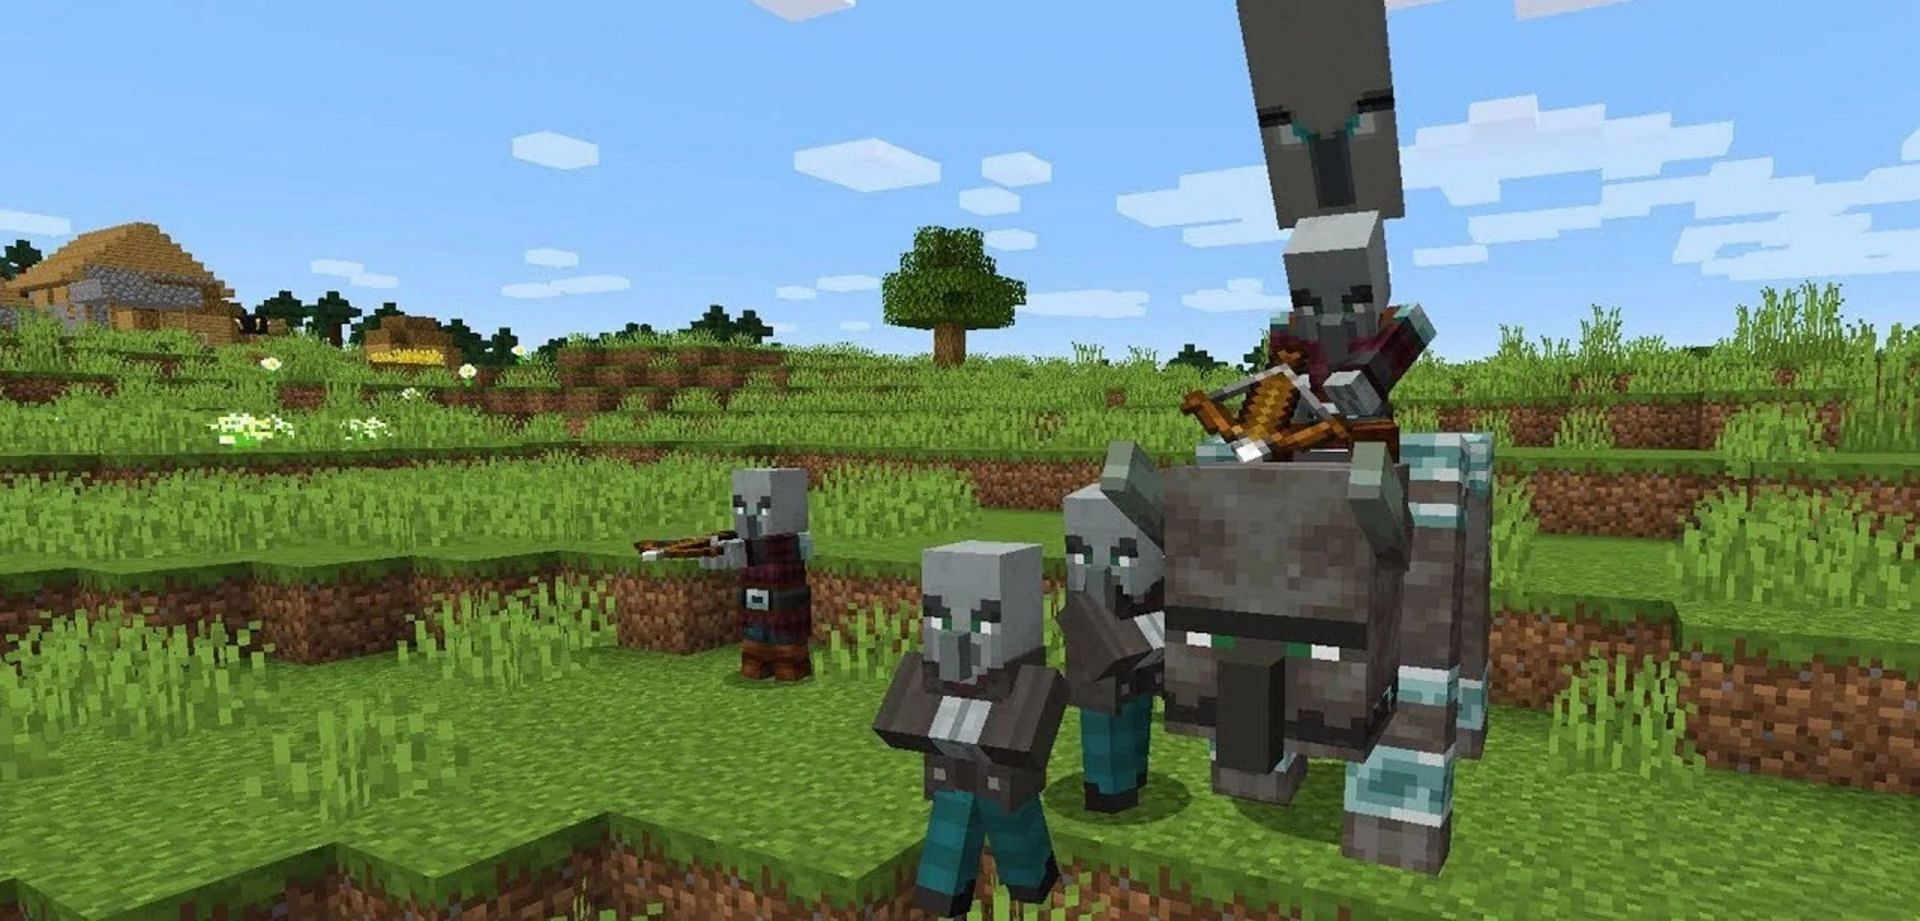 Ravagers can be seen with pillager warbands attacking villages (Image via Mojang)